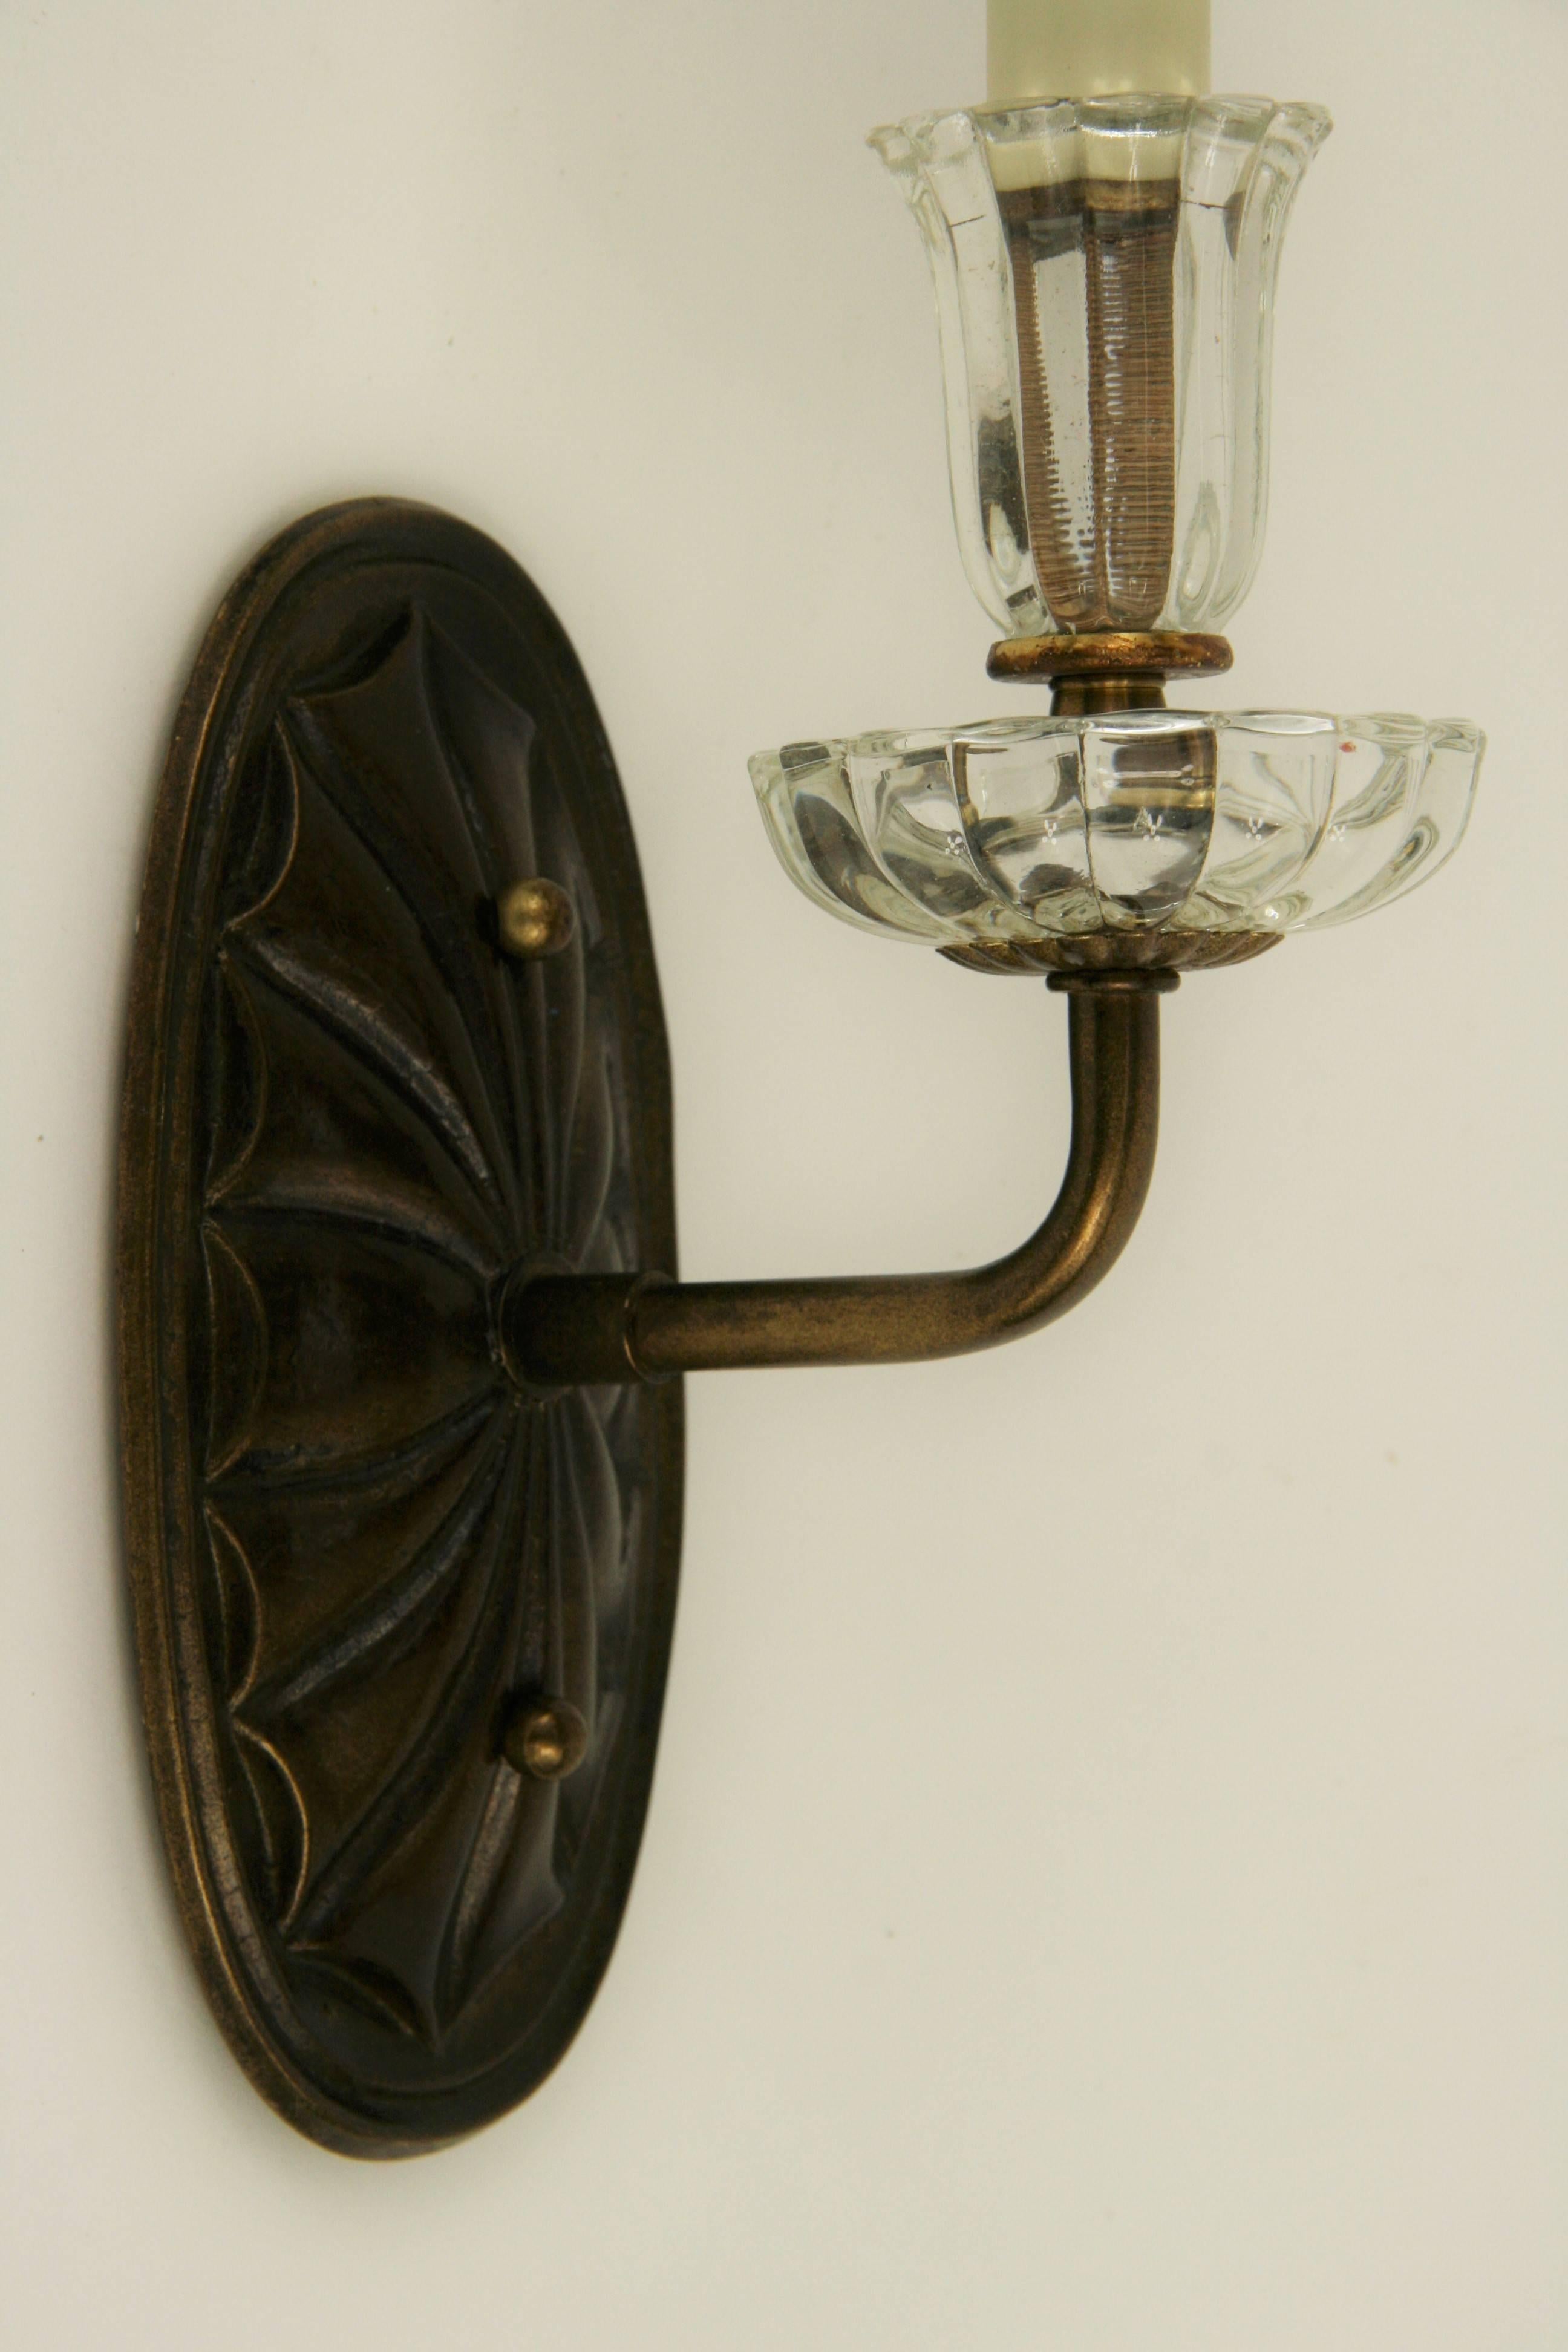 #2-1826 a pair of darkned brass foliate backplate supporting a single arm ending with glass tulip bobeche.
Newly rewired.